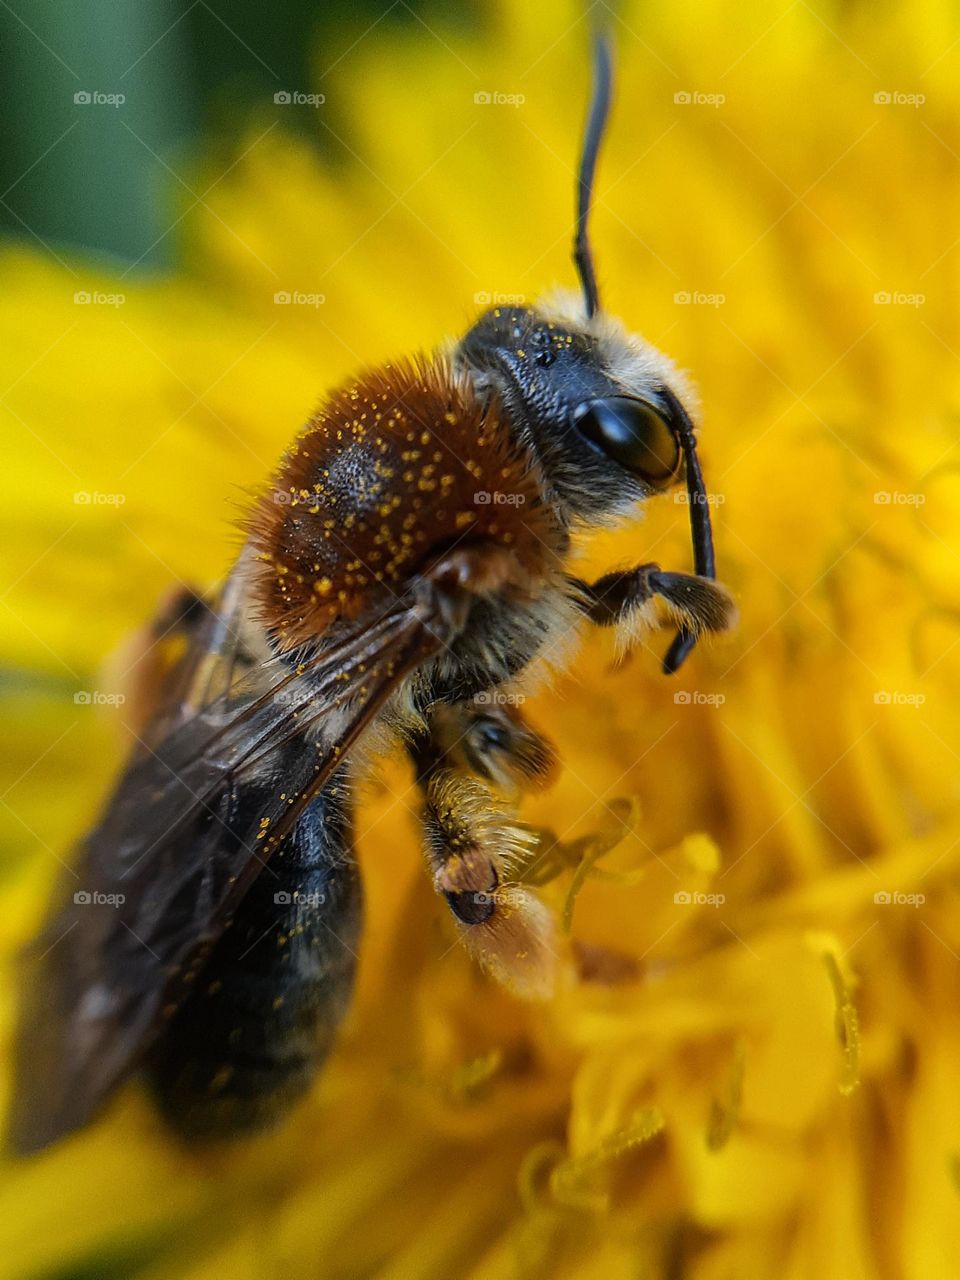 A wild bee sits on the petals of a dandelion in a city park